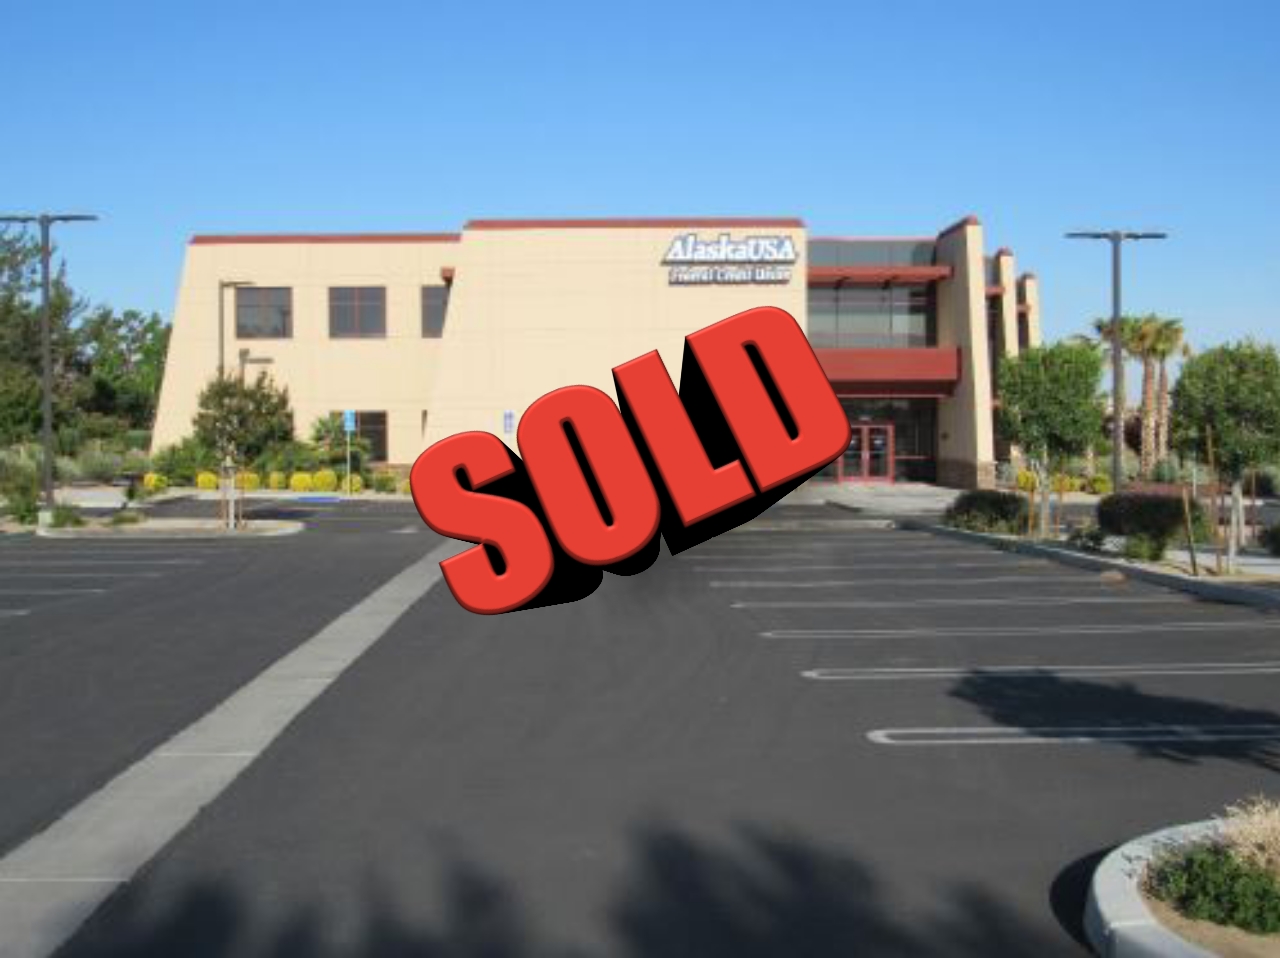 19111 Town Center Dr, Apple Valley, CA Office Building just sold